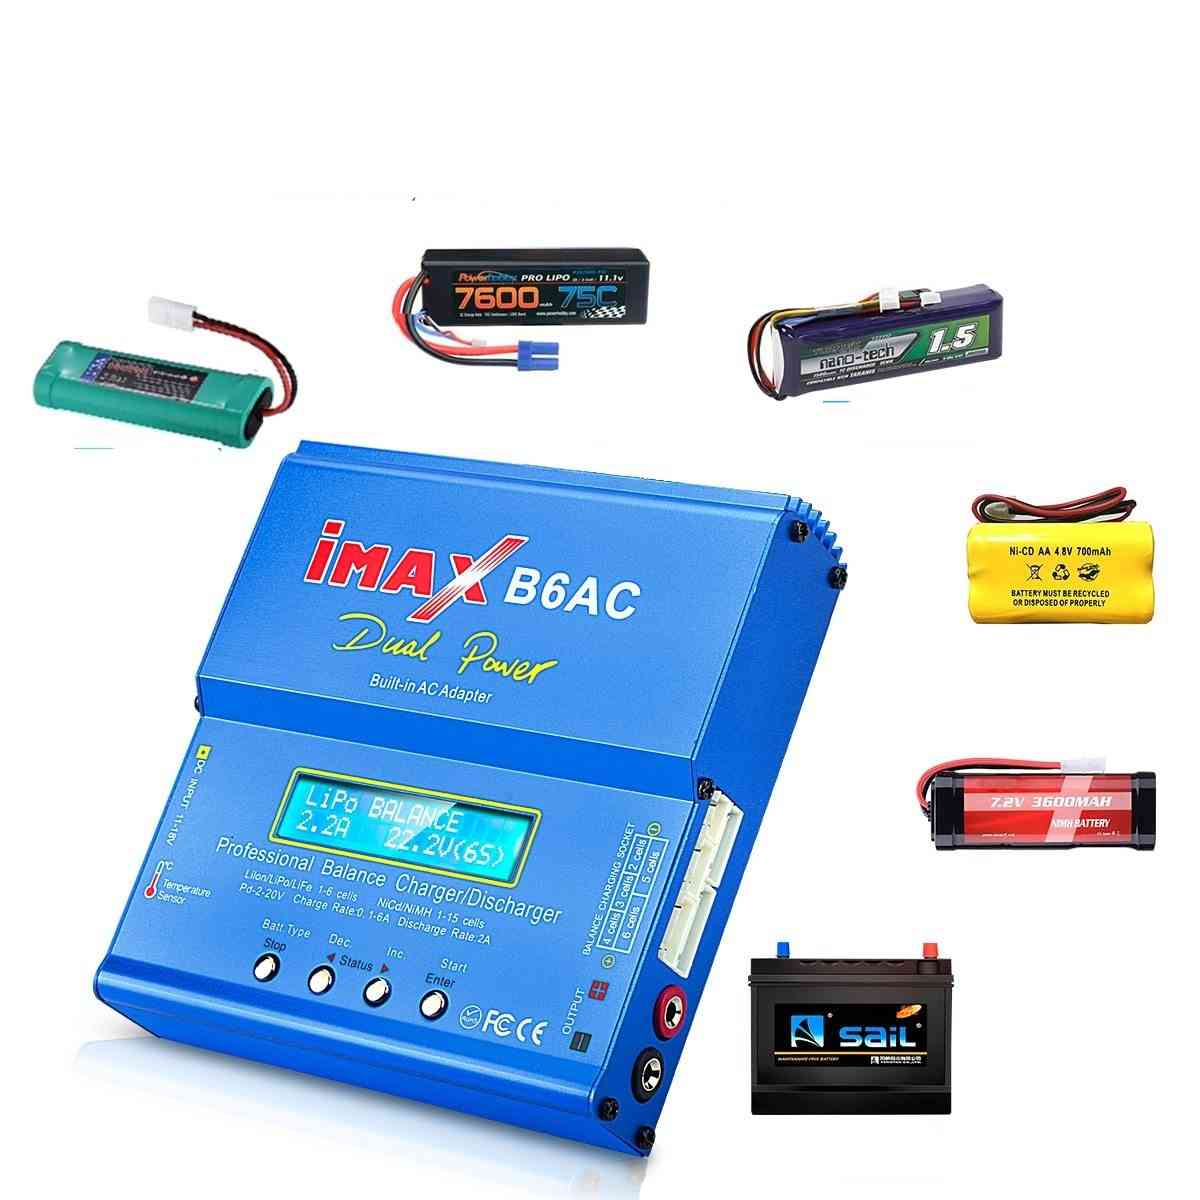 Htrc Imax Ac Rc Charger Dual Channel Balance, Digital Lcd Screen Li-ion Battery Discharger